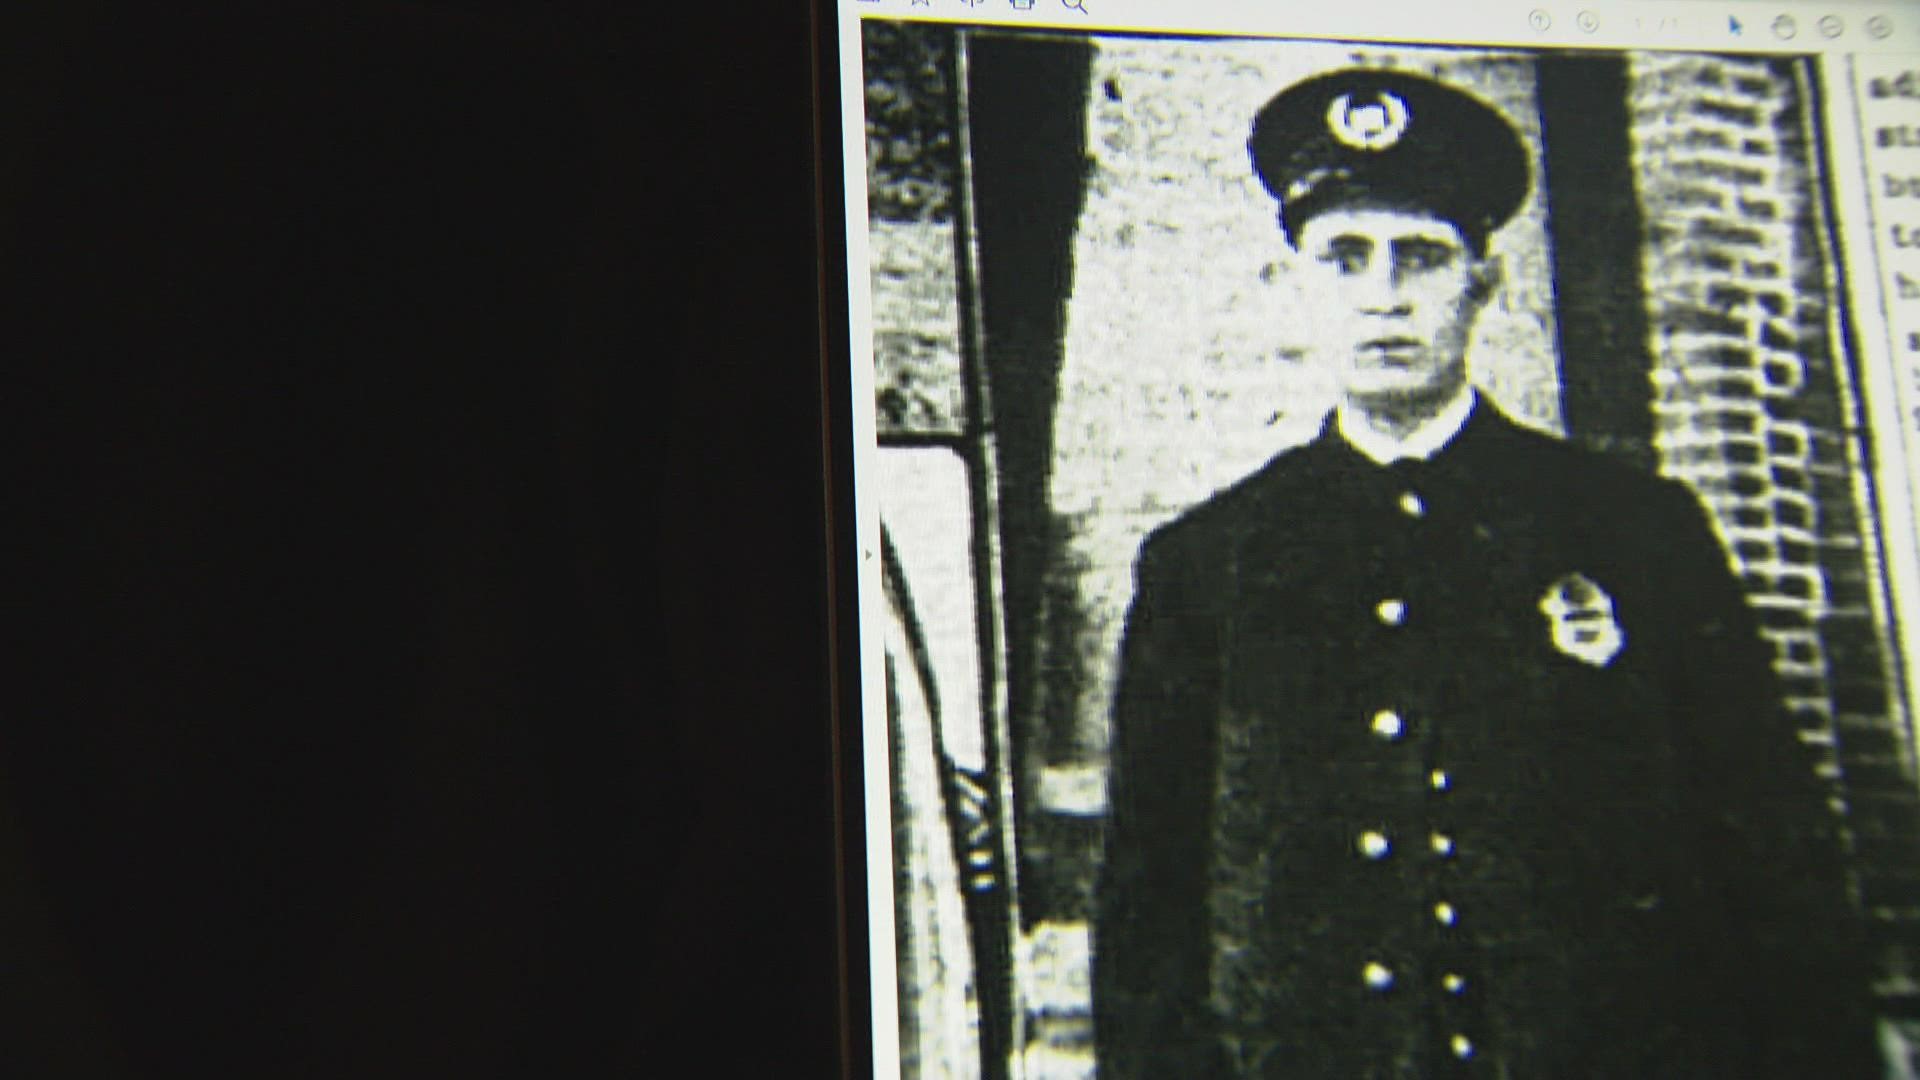 Officer Rose was shot 13 times next to his police call box in north Denver on Oct. 31, 1922.